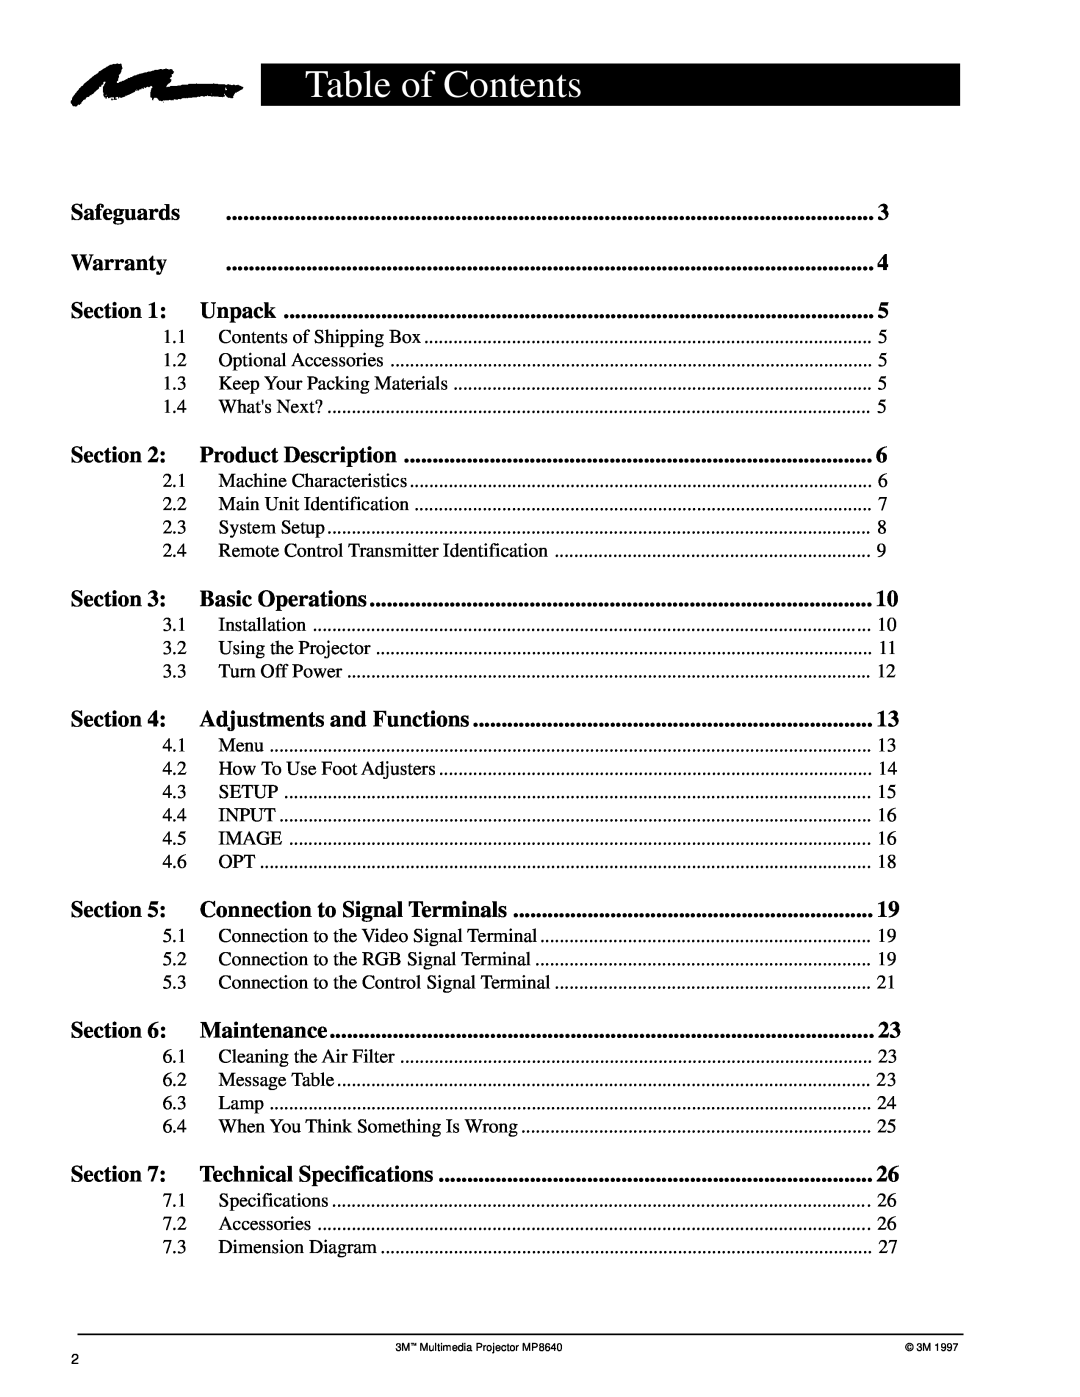 3M MP8640 manual Table of Contents 